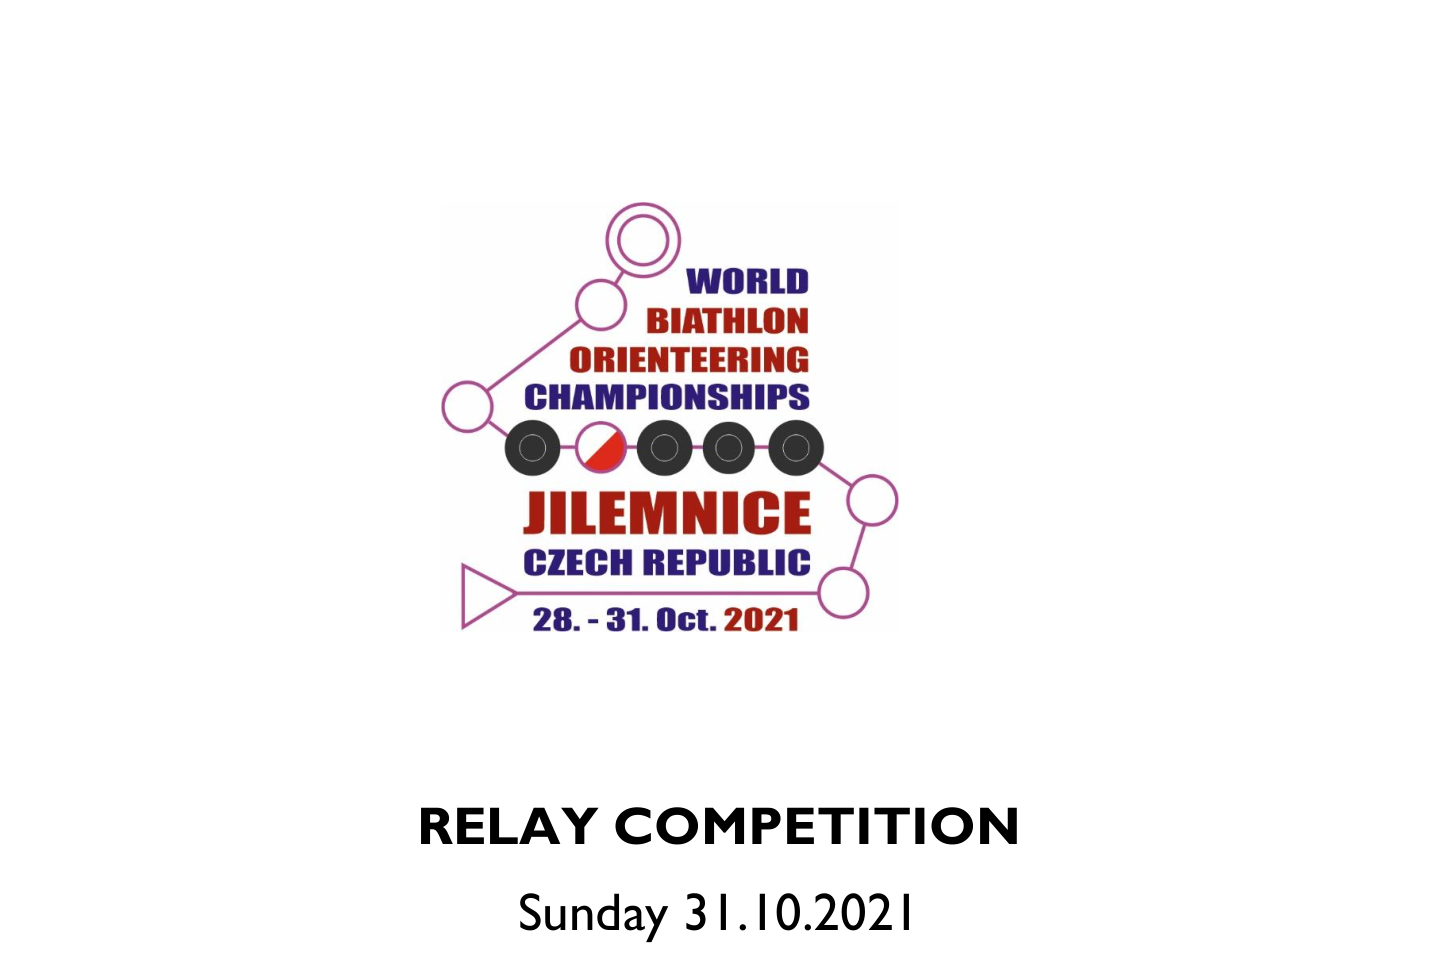 Download RELAY competition instructions